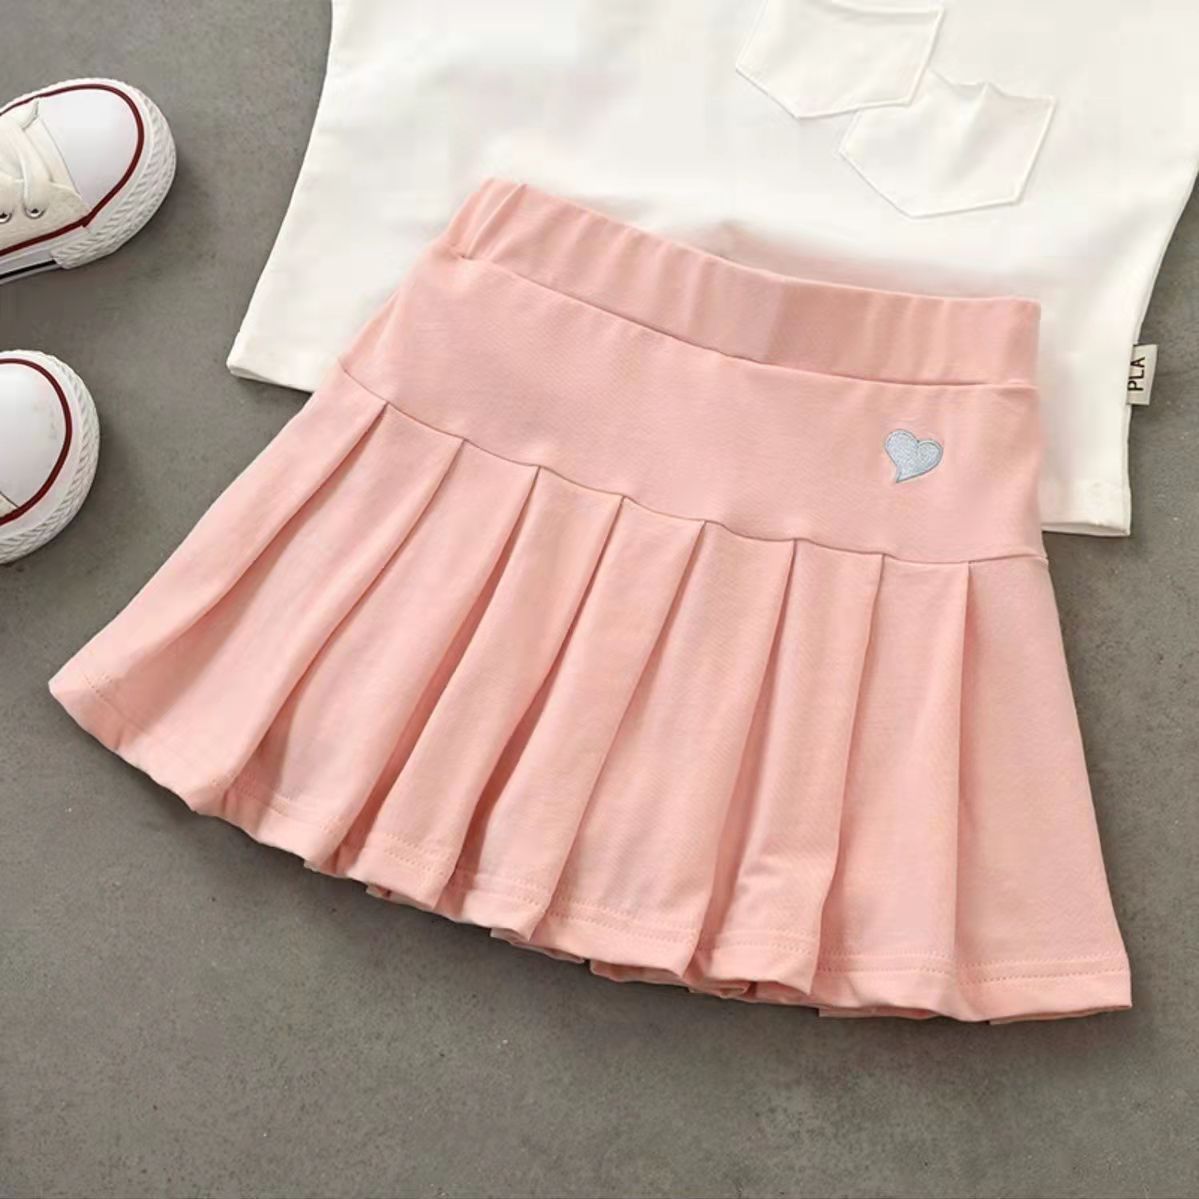 Preppy Pleated Mini Skirt Shorts - Shoptery